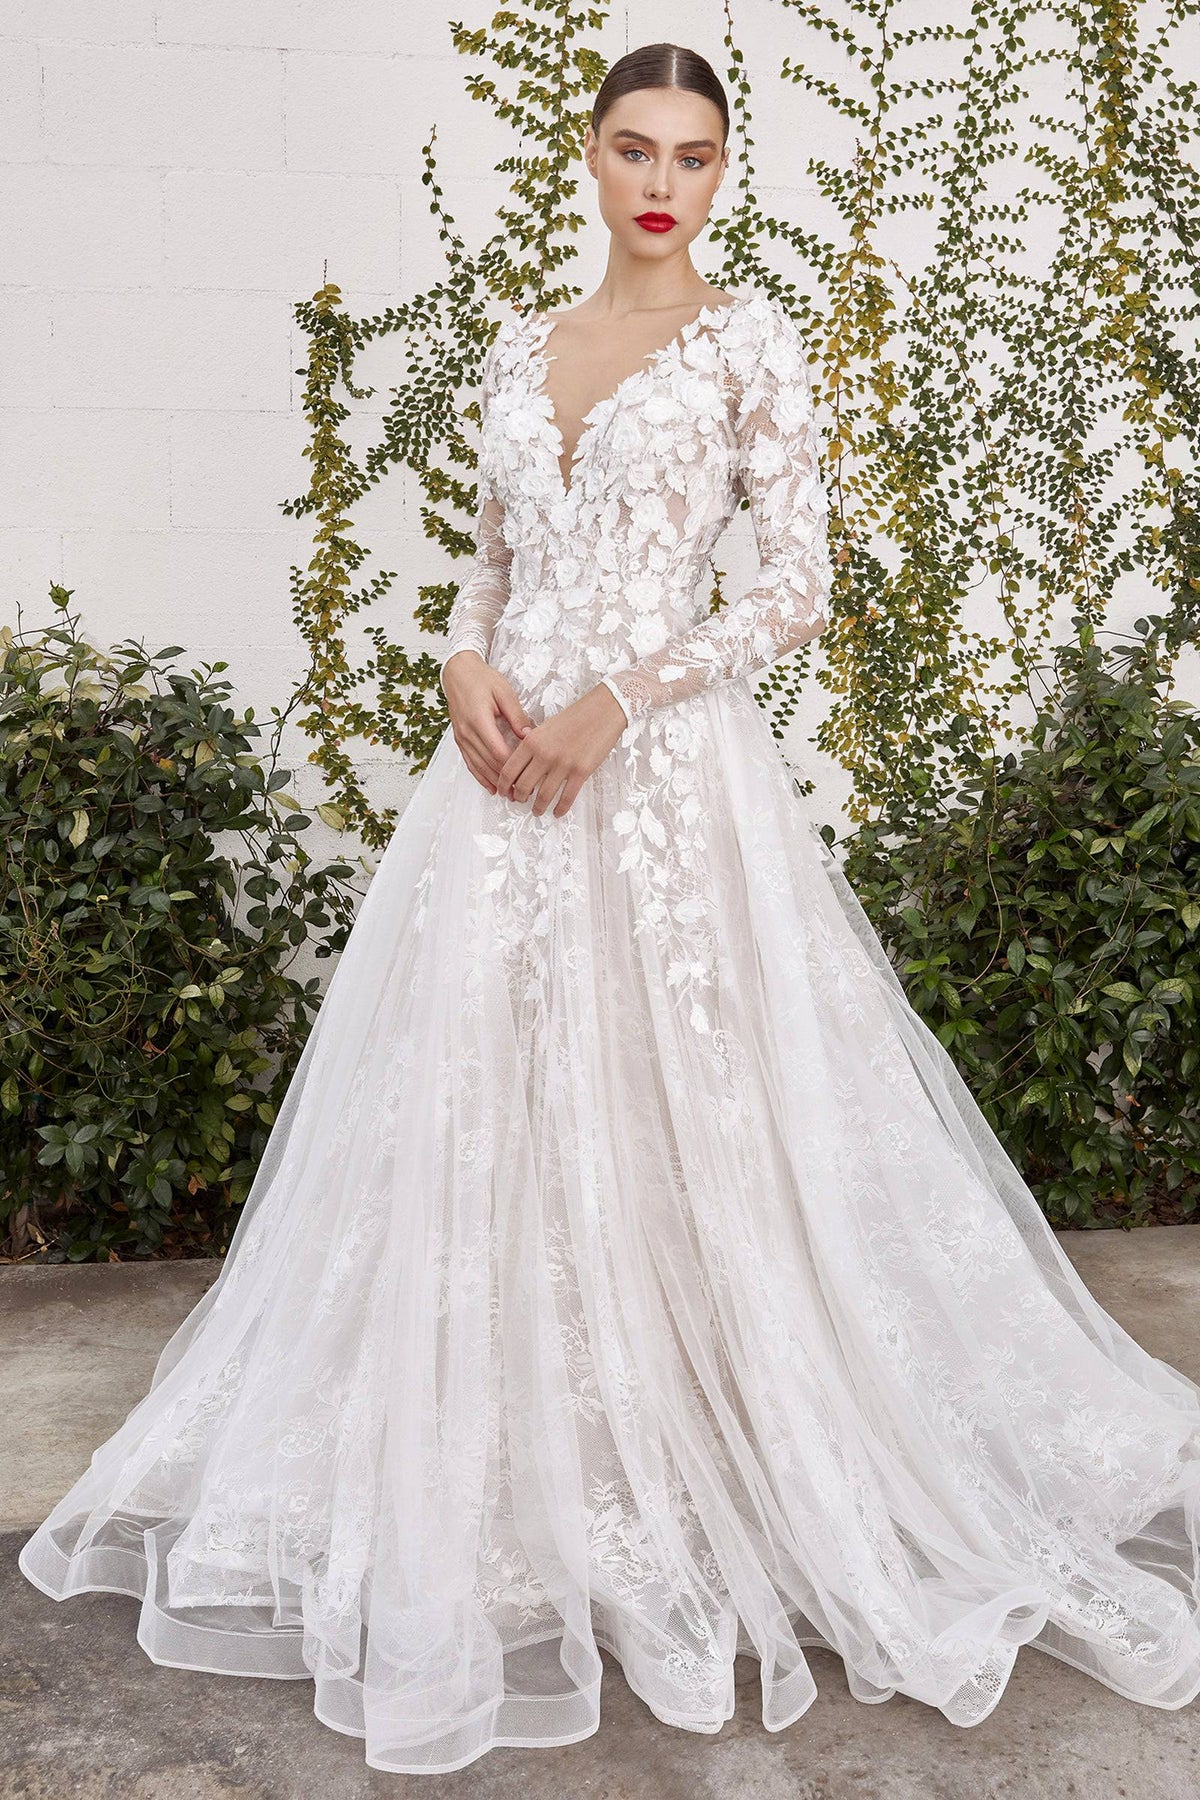 Sexy Long-Sleeve Lace Wedding Dress with Cutouts and Full Train